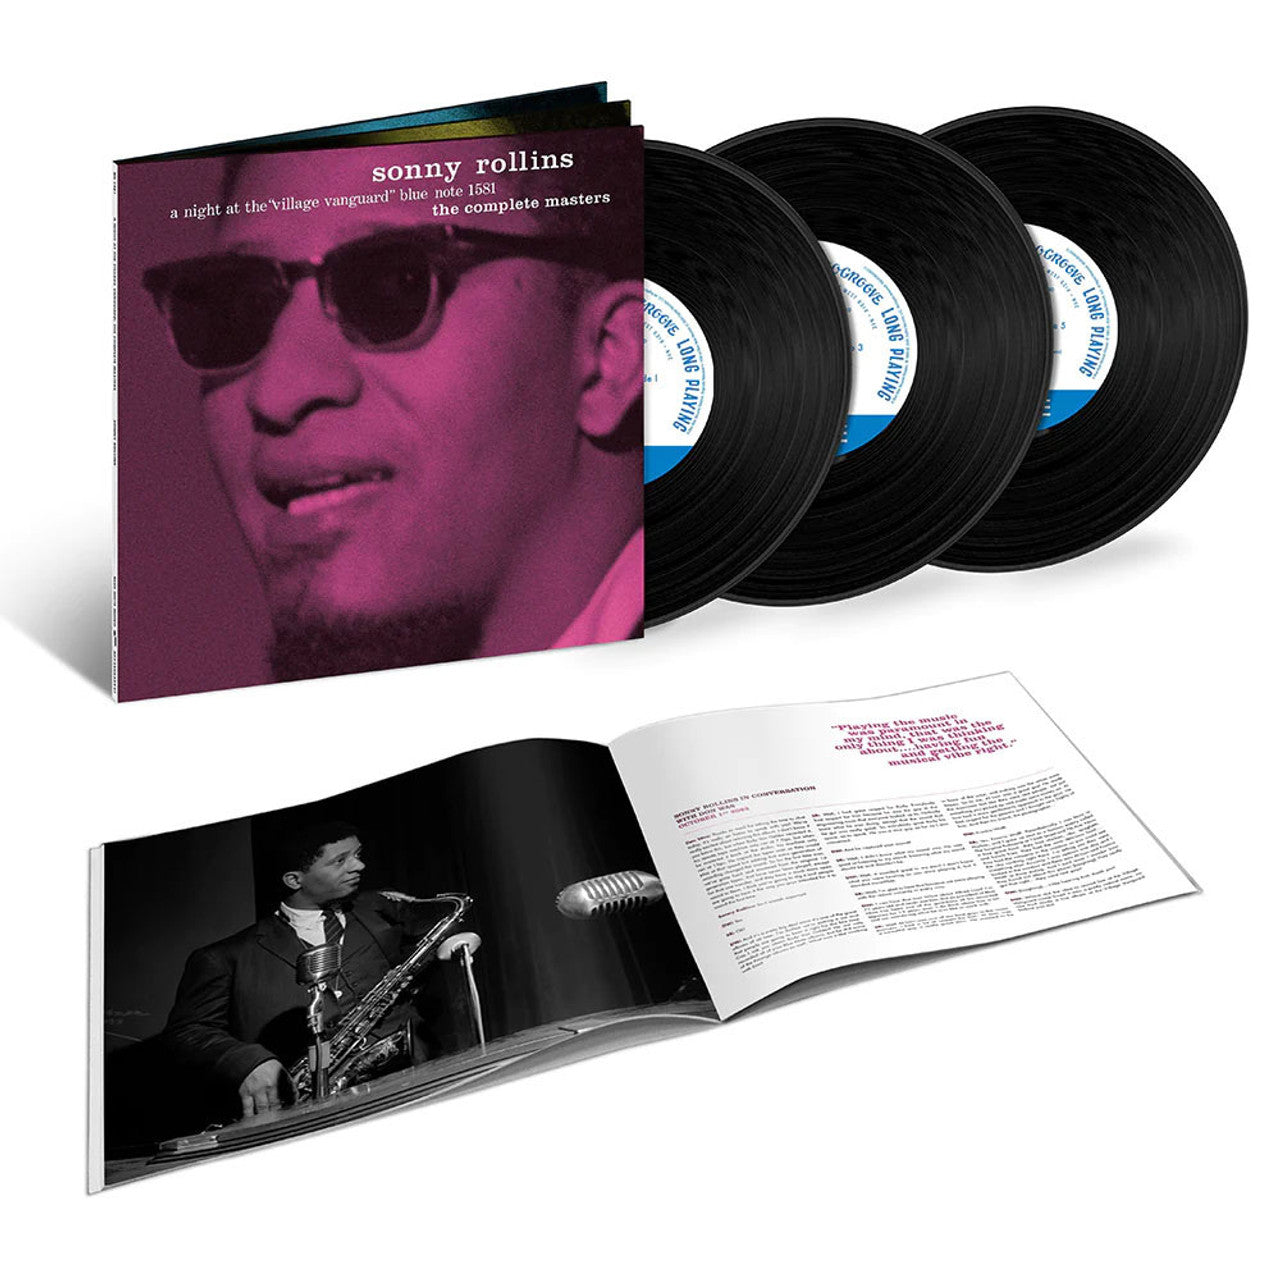 Order Sonny Rollins - A Night at the Village Vanguard: The Complete Masters (3xLP Vinyl, Blue Note Tone Poet Series)